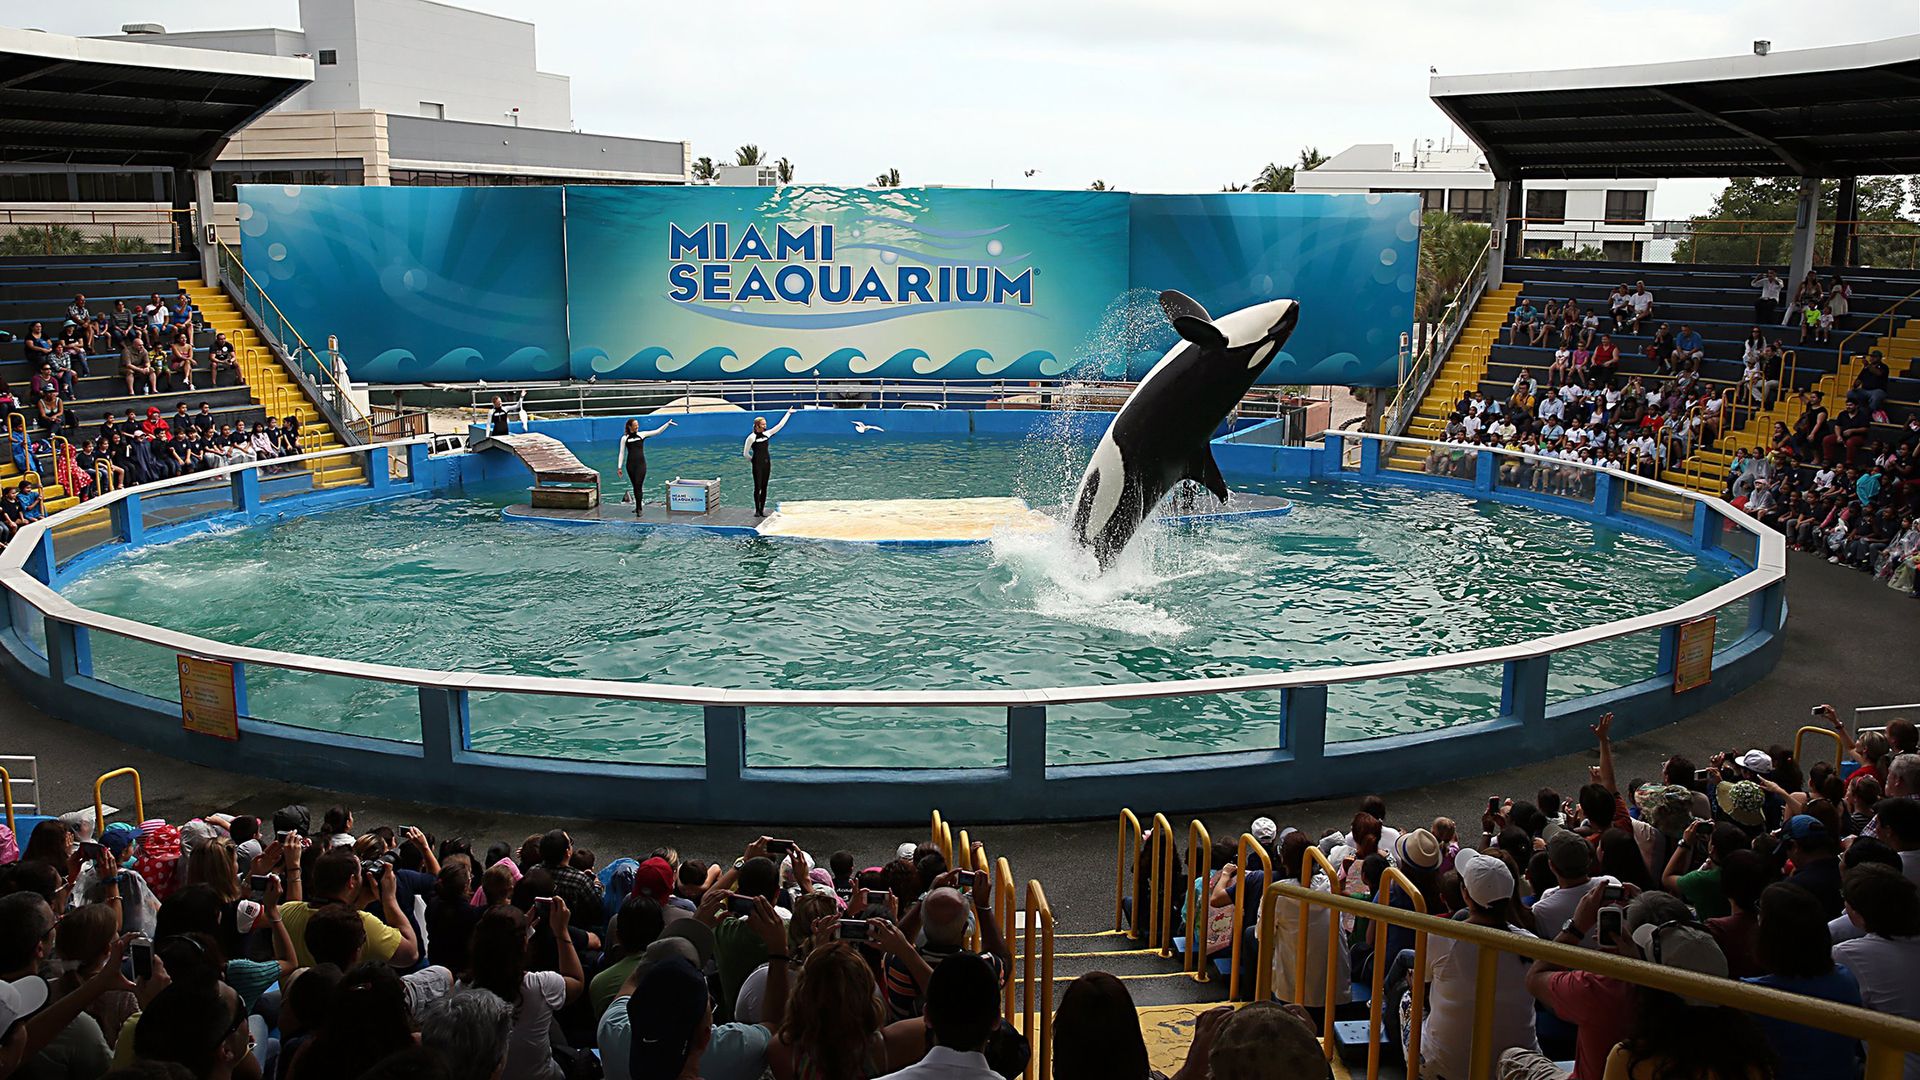 Lolita the orca does a backflip in her pool-like tank. 